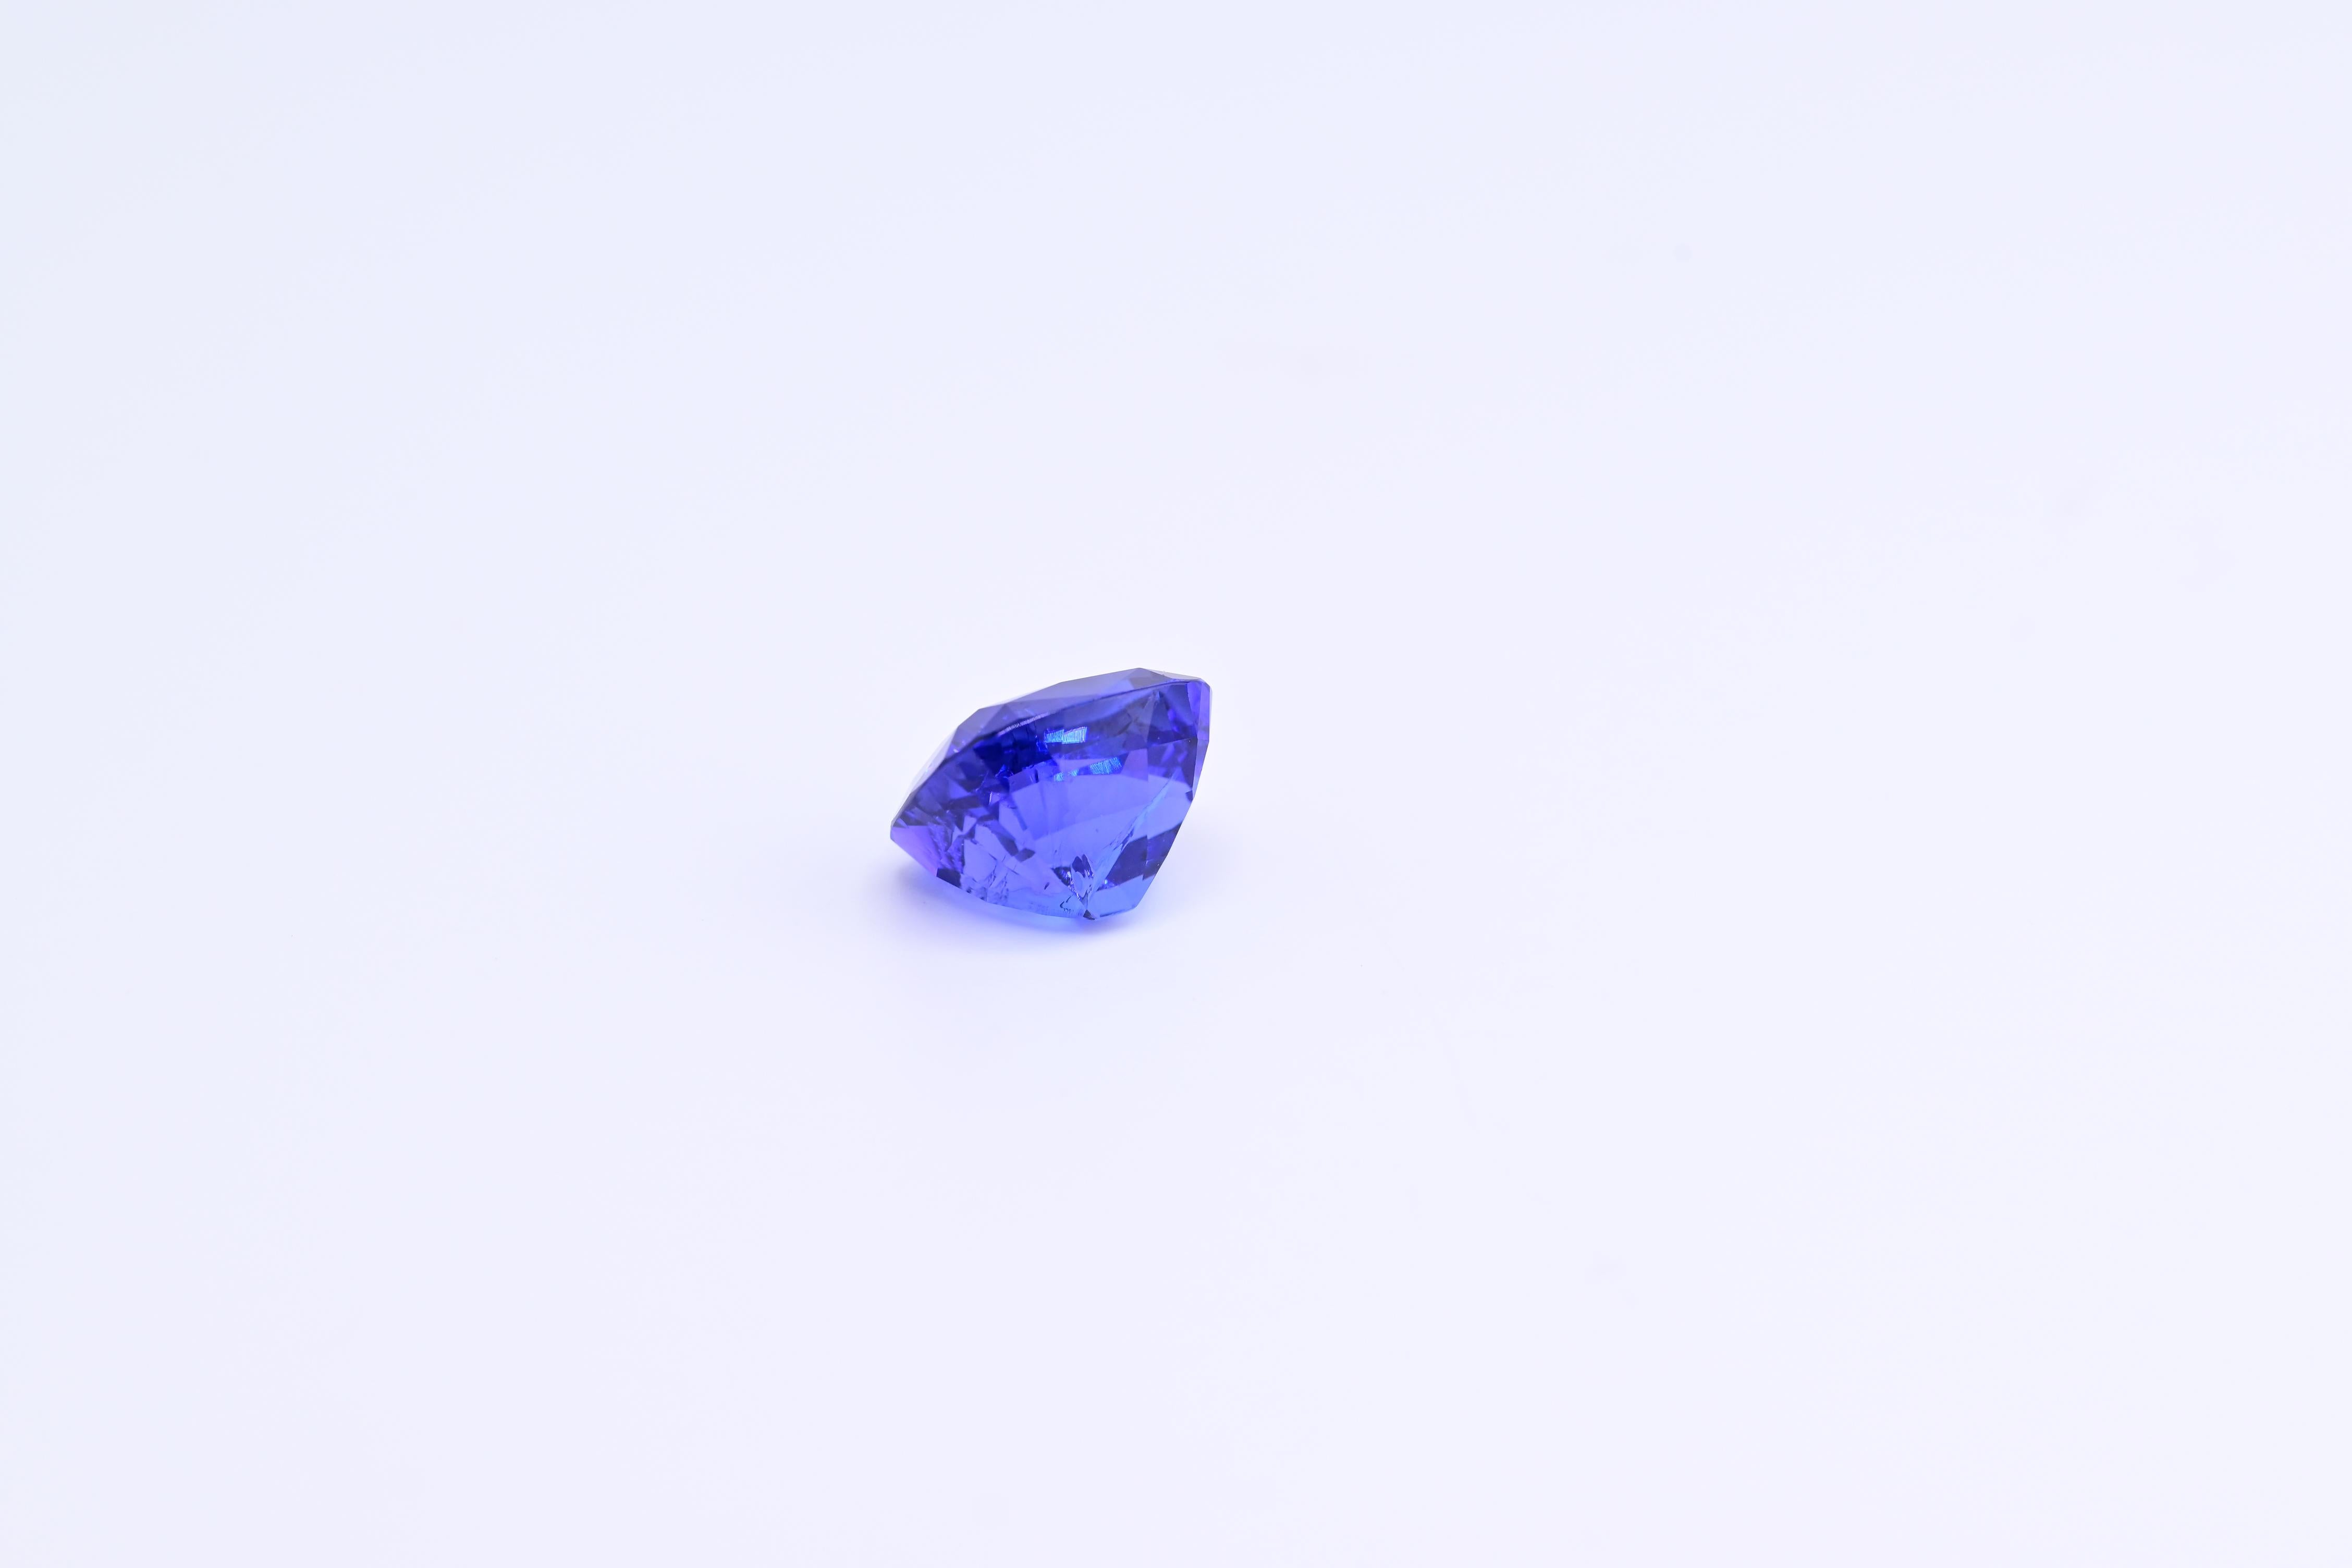 Exceptional Vivid Tanzanite Loose Stone 11.01 Carats GIA Certified In Excellent Condition For Sale In Media, PA